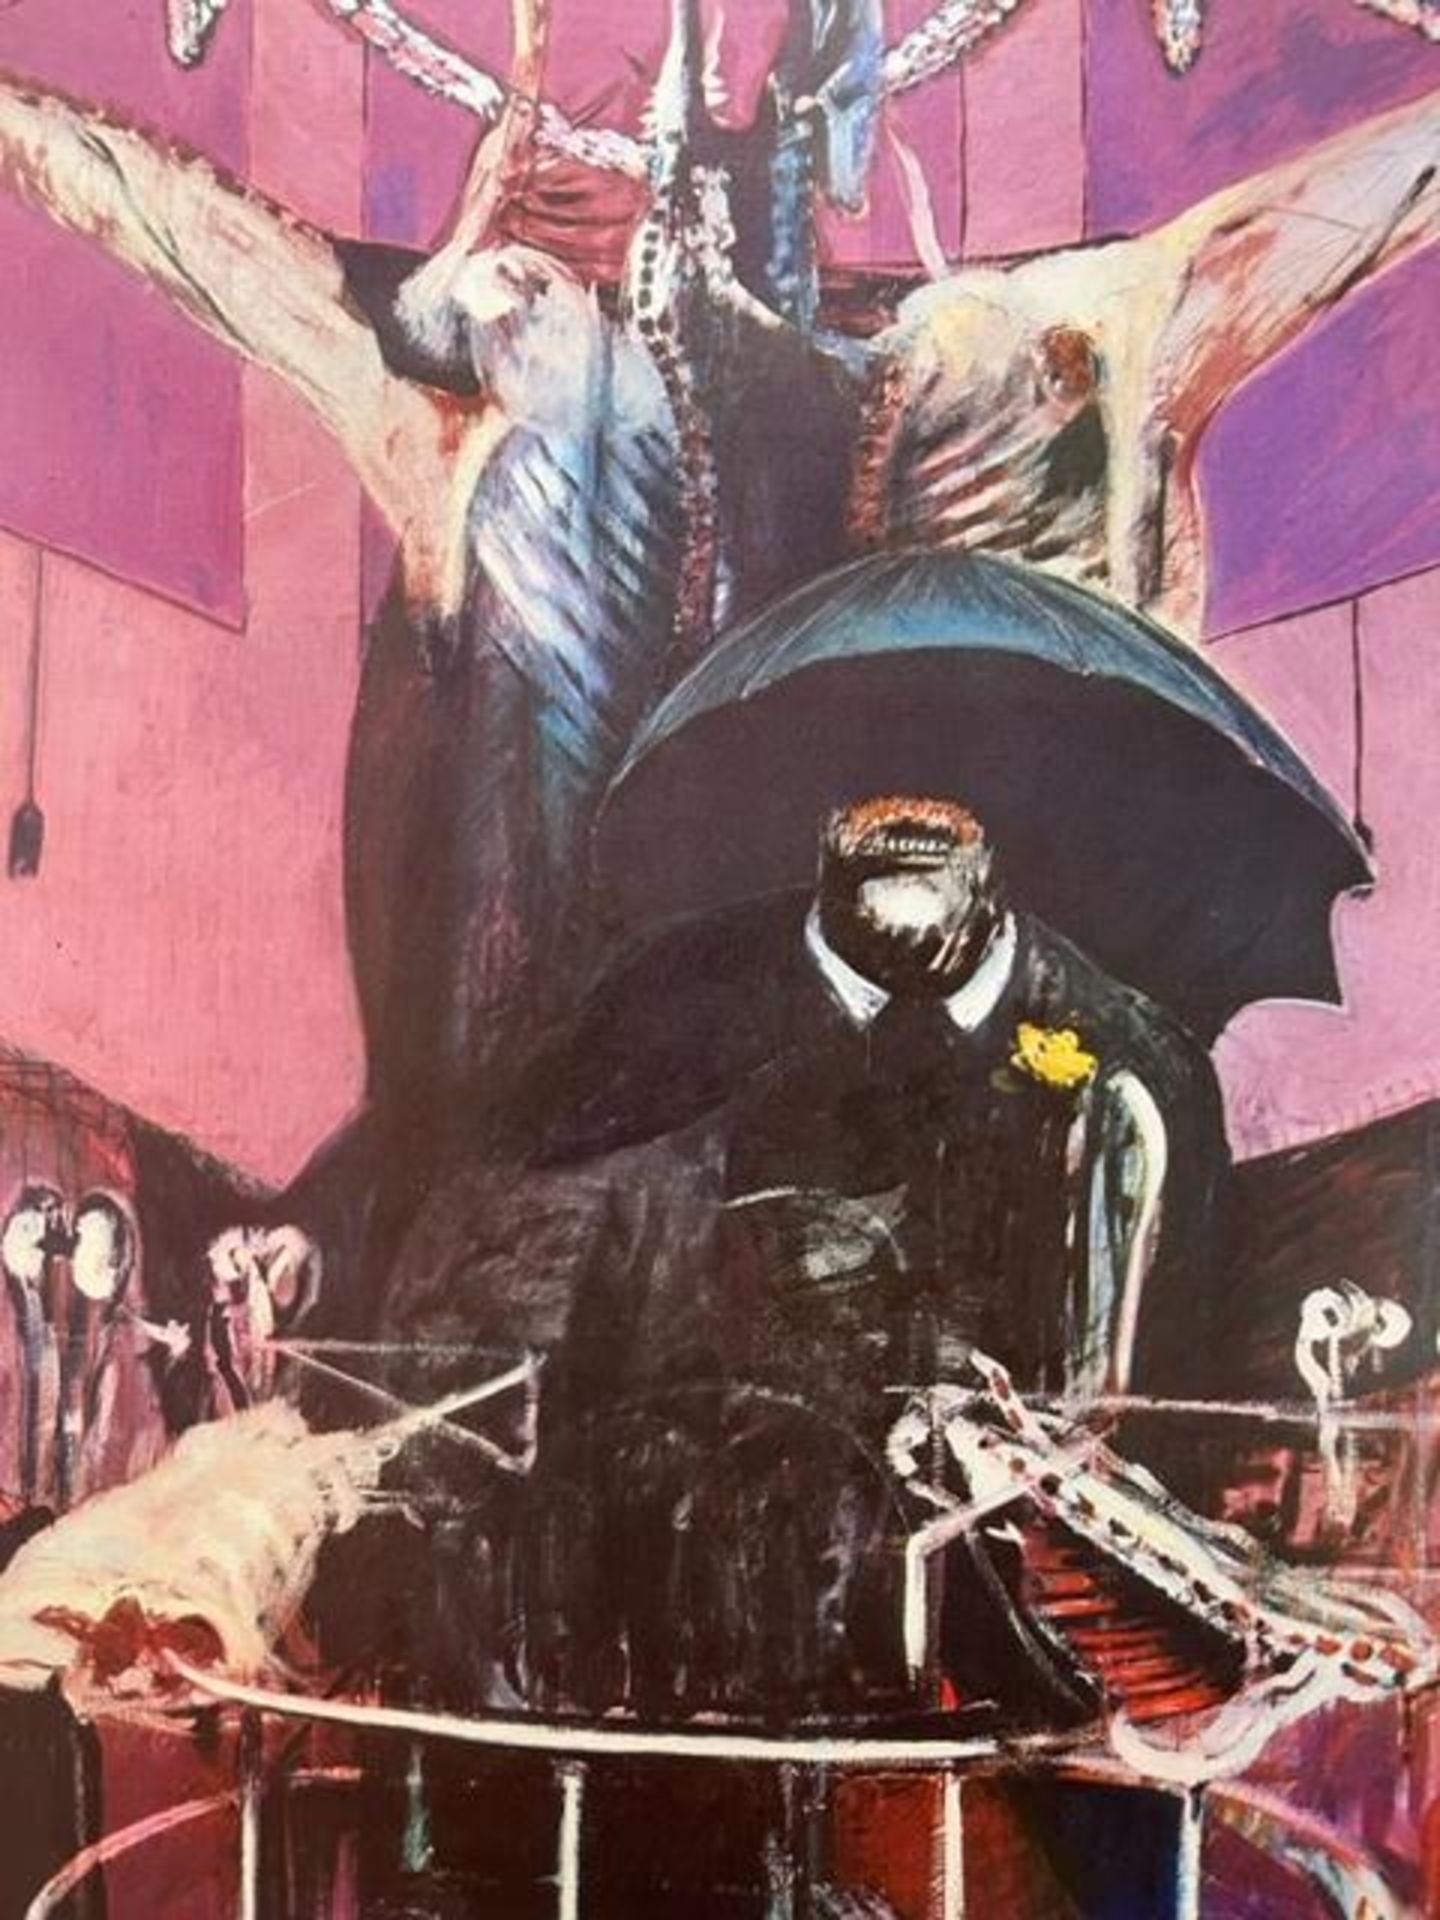 Francis Bacon "Painting" Print. - Image 2 of 12